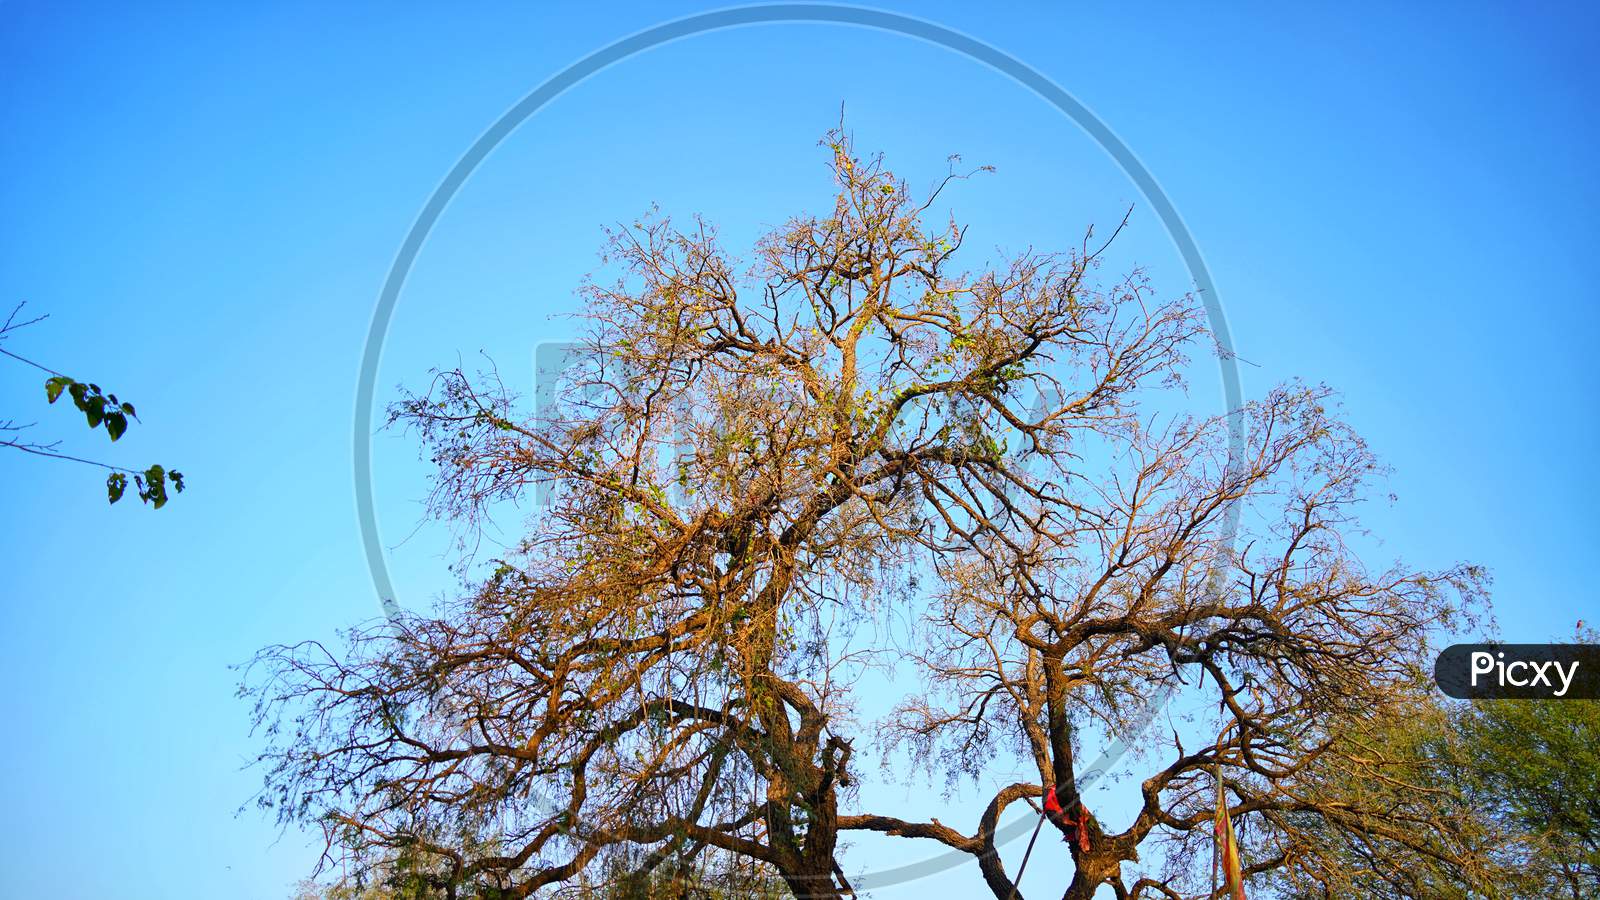 Scary Tree View With Naked Leaves. Big Branches Of Tree Closeup Shot With Blue Sky Nature Concept.